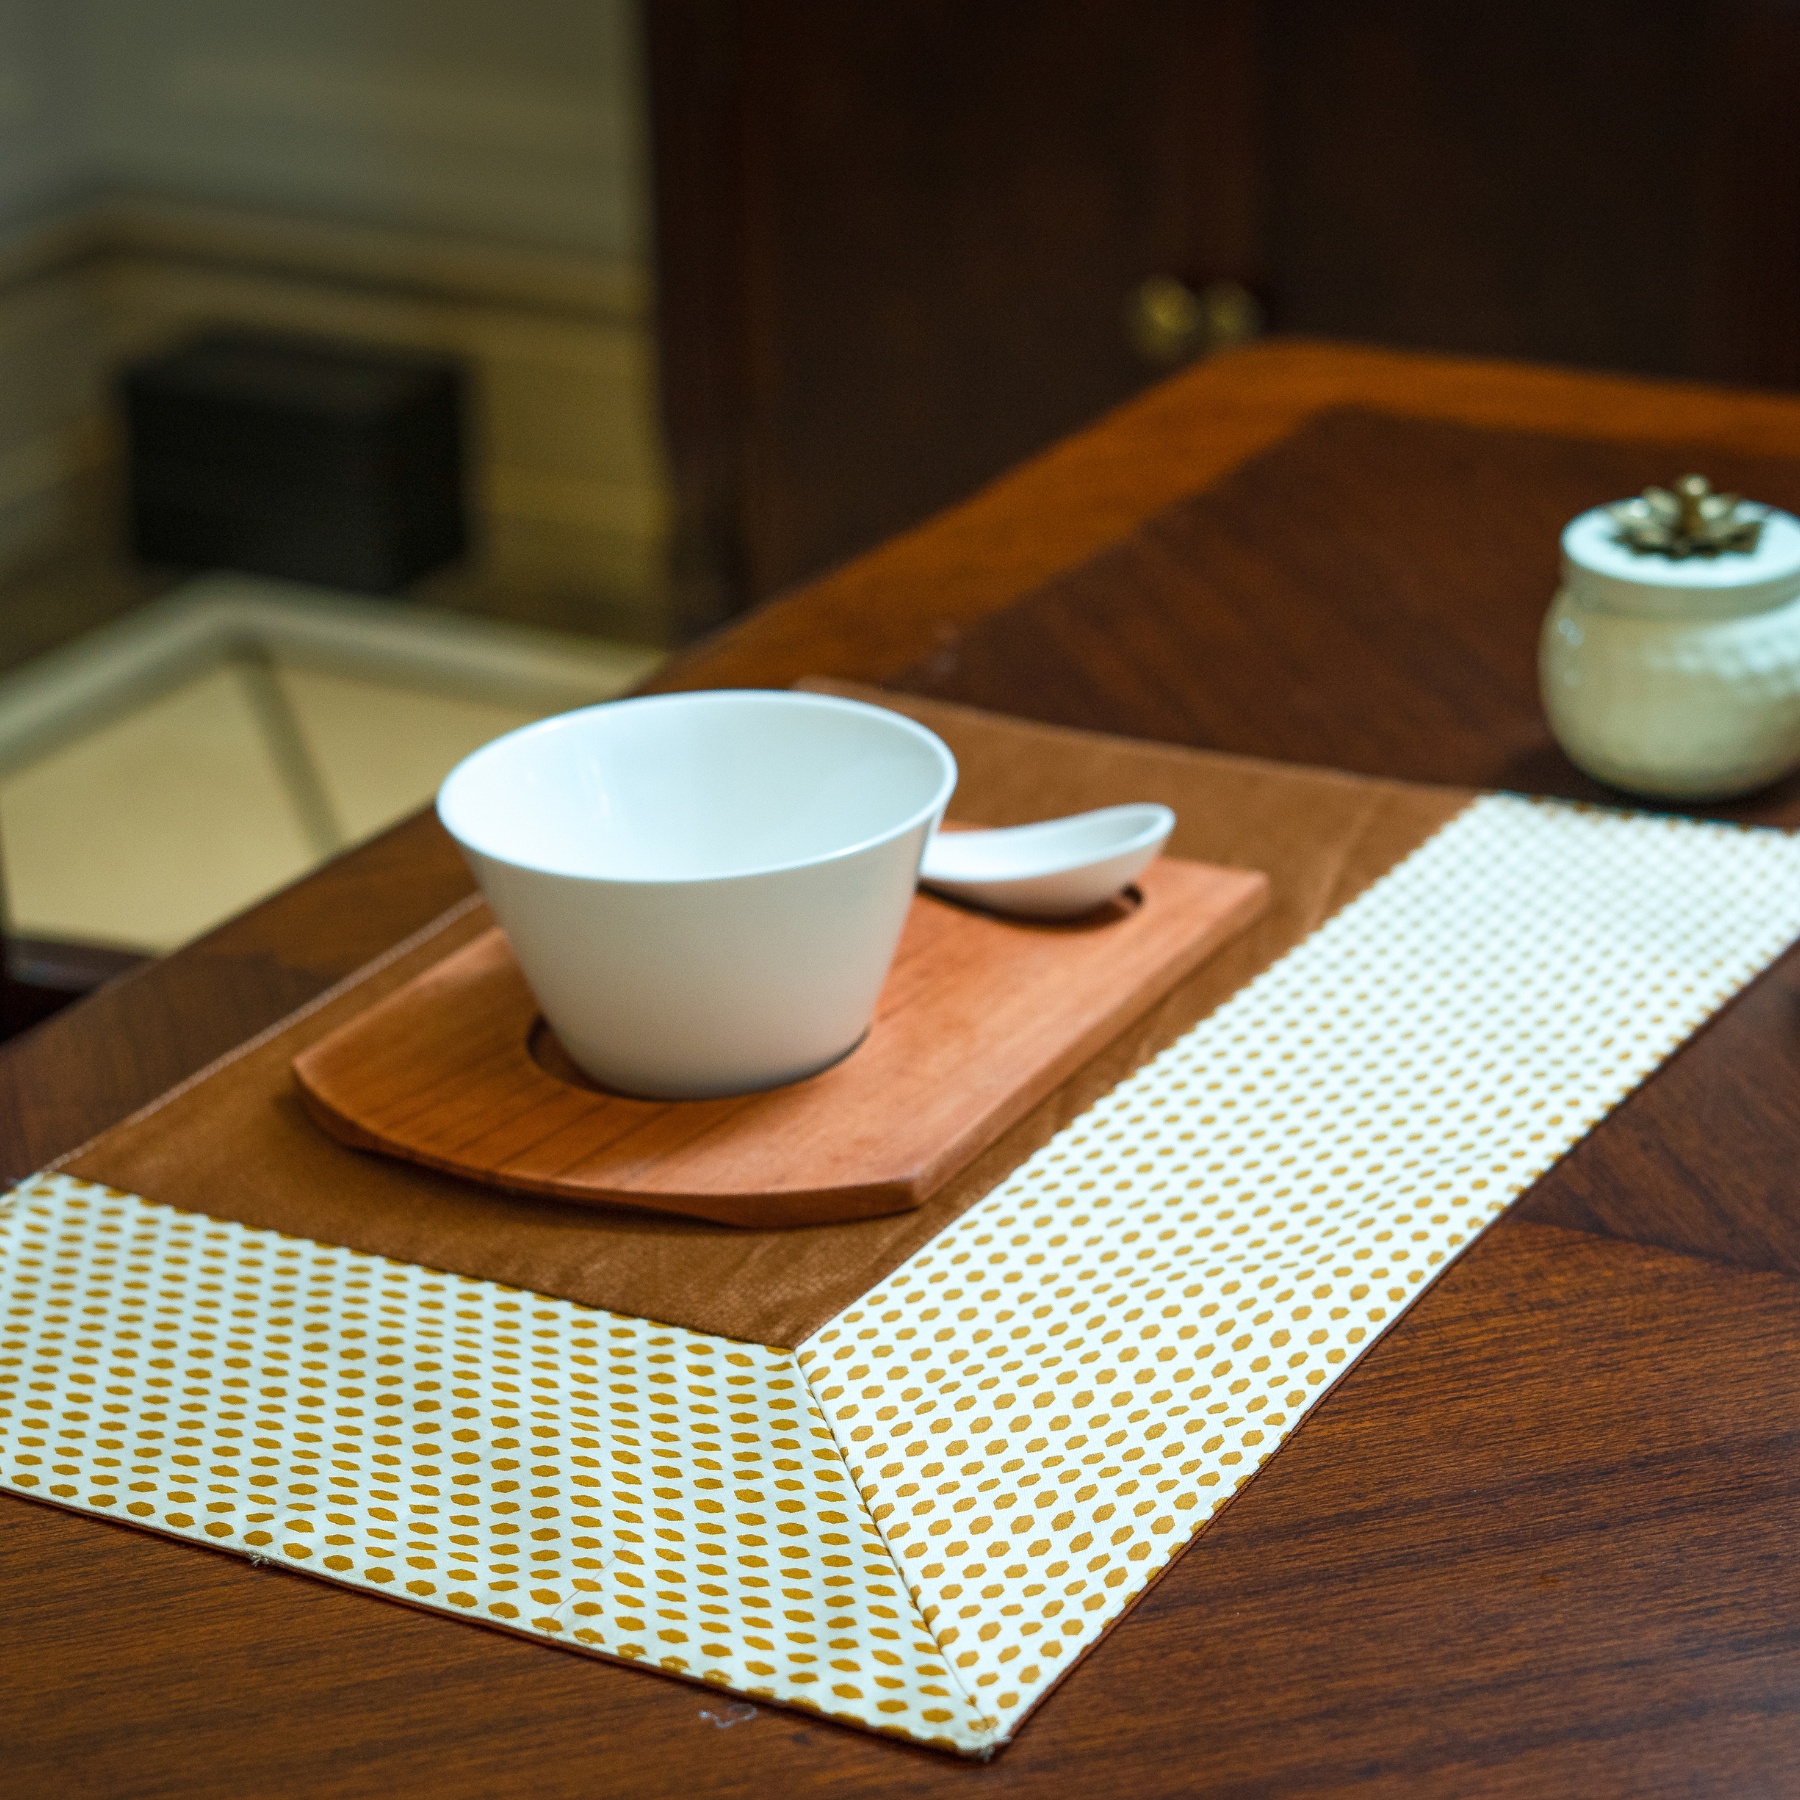 The Luxelife Polka Placemats